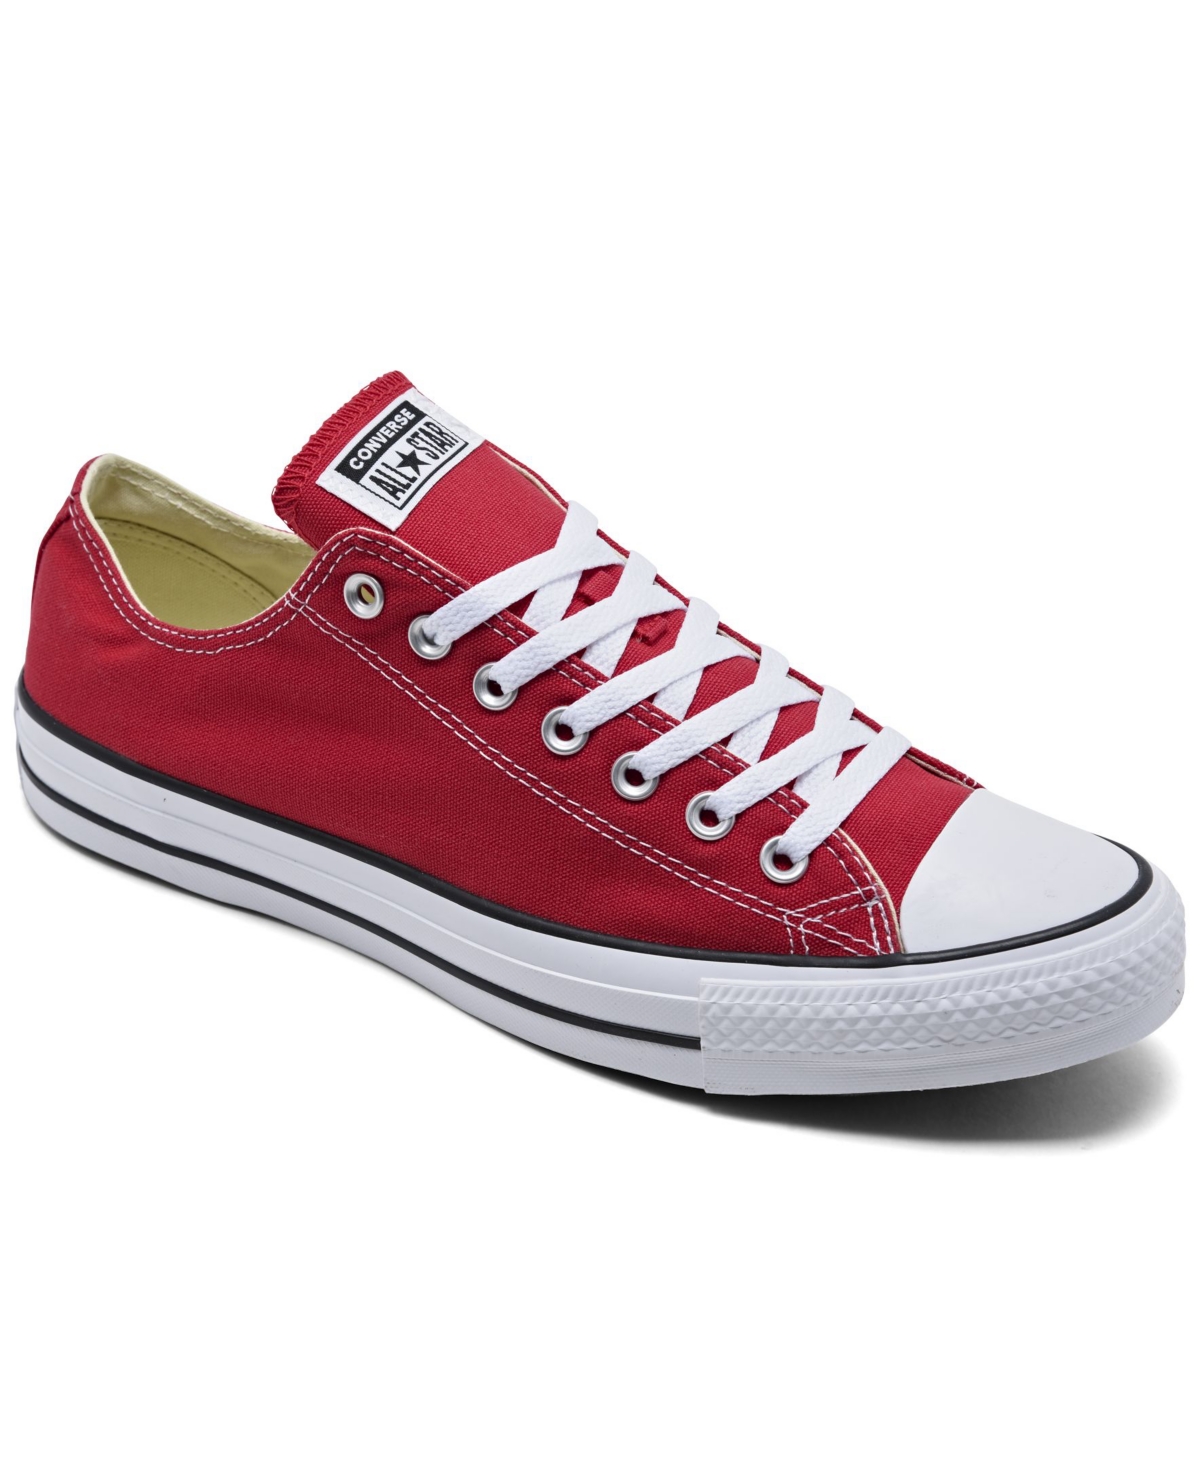 UPC 022859566643 product image for Converse Men's Chuck Taylor Low Top Sneakers from Finish Line | upcitemdb.com